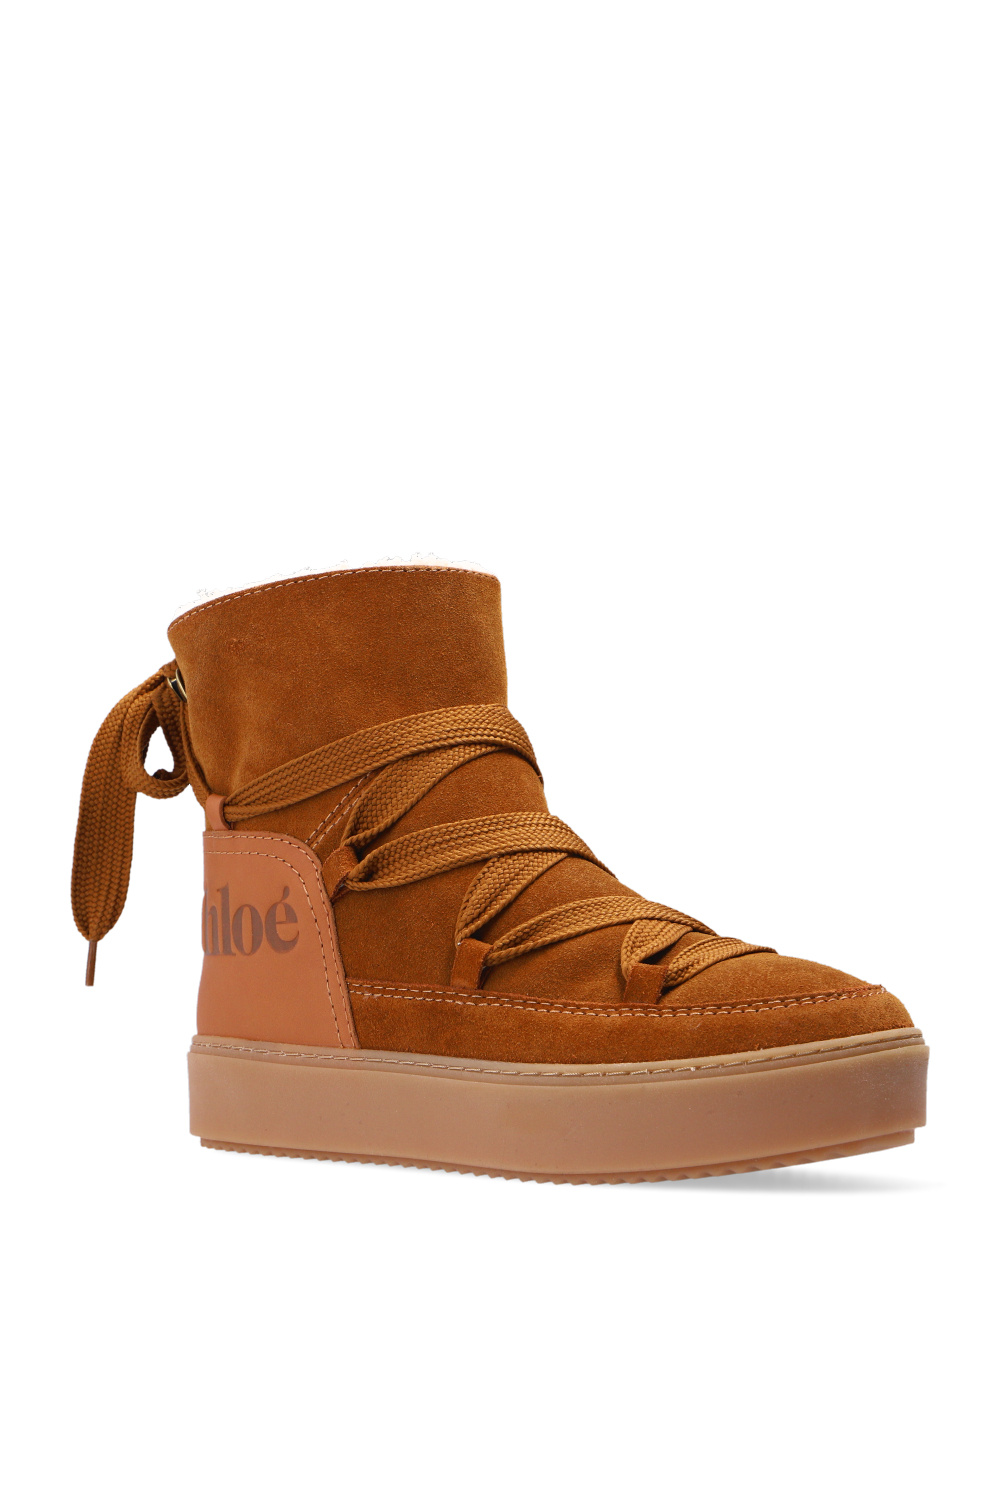 See By Chloe ‘Charlee’ suede ankle boots